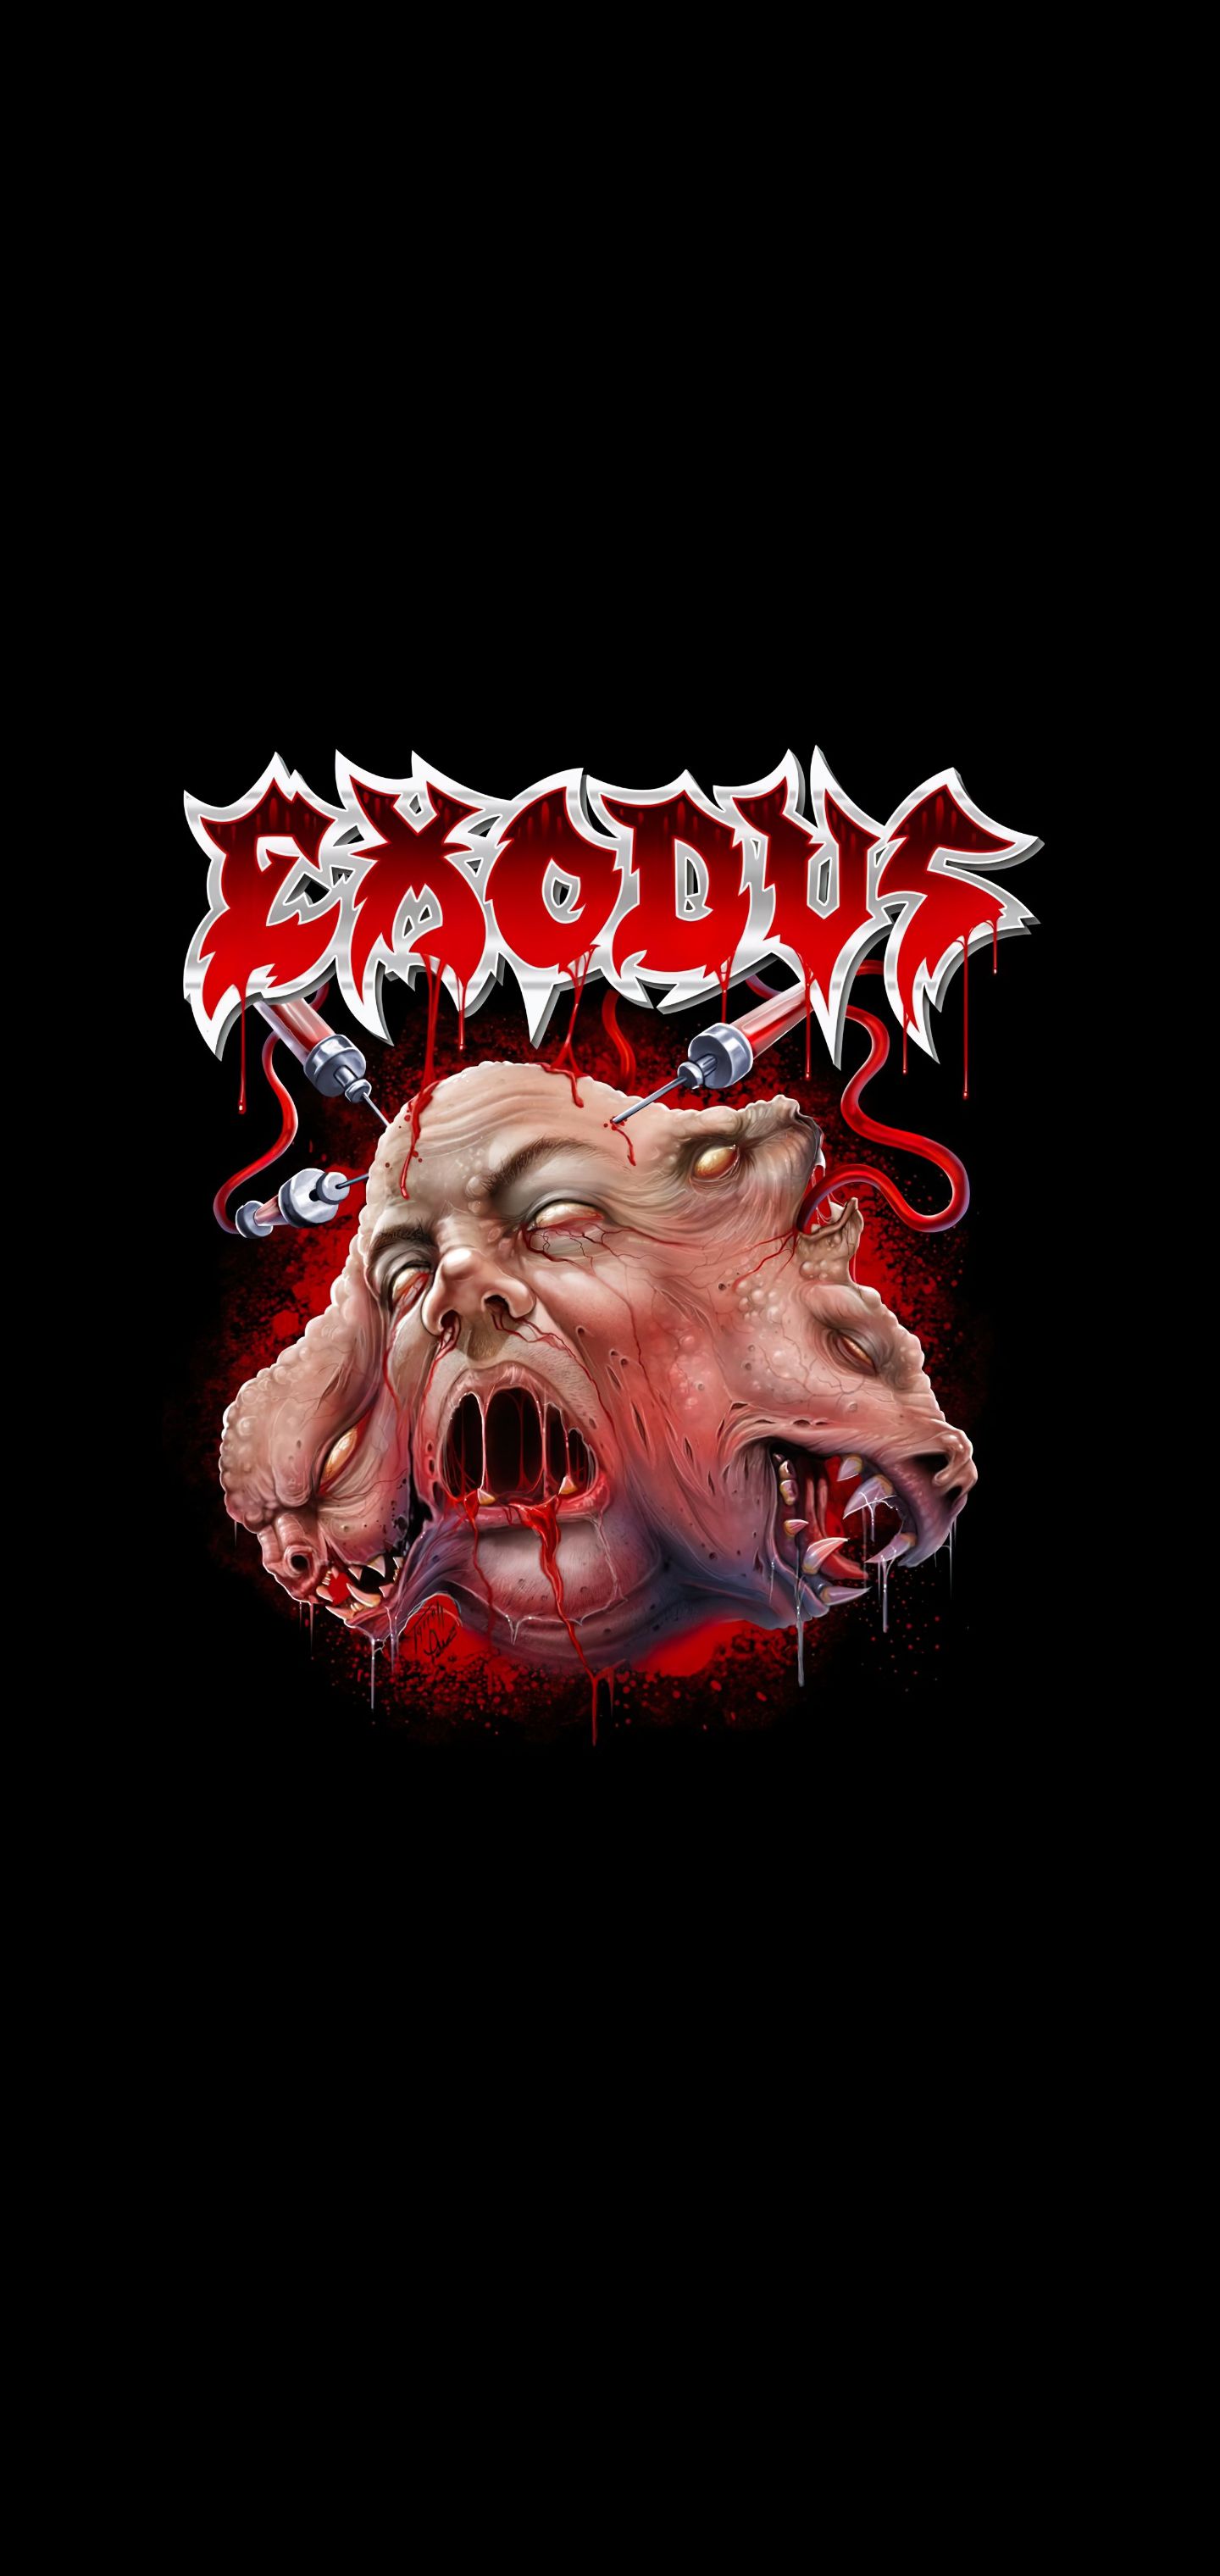 Exodus HD Wallpapers and Backgrounds